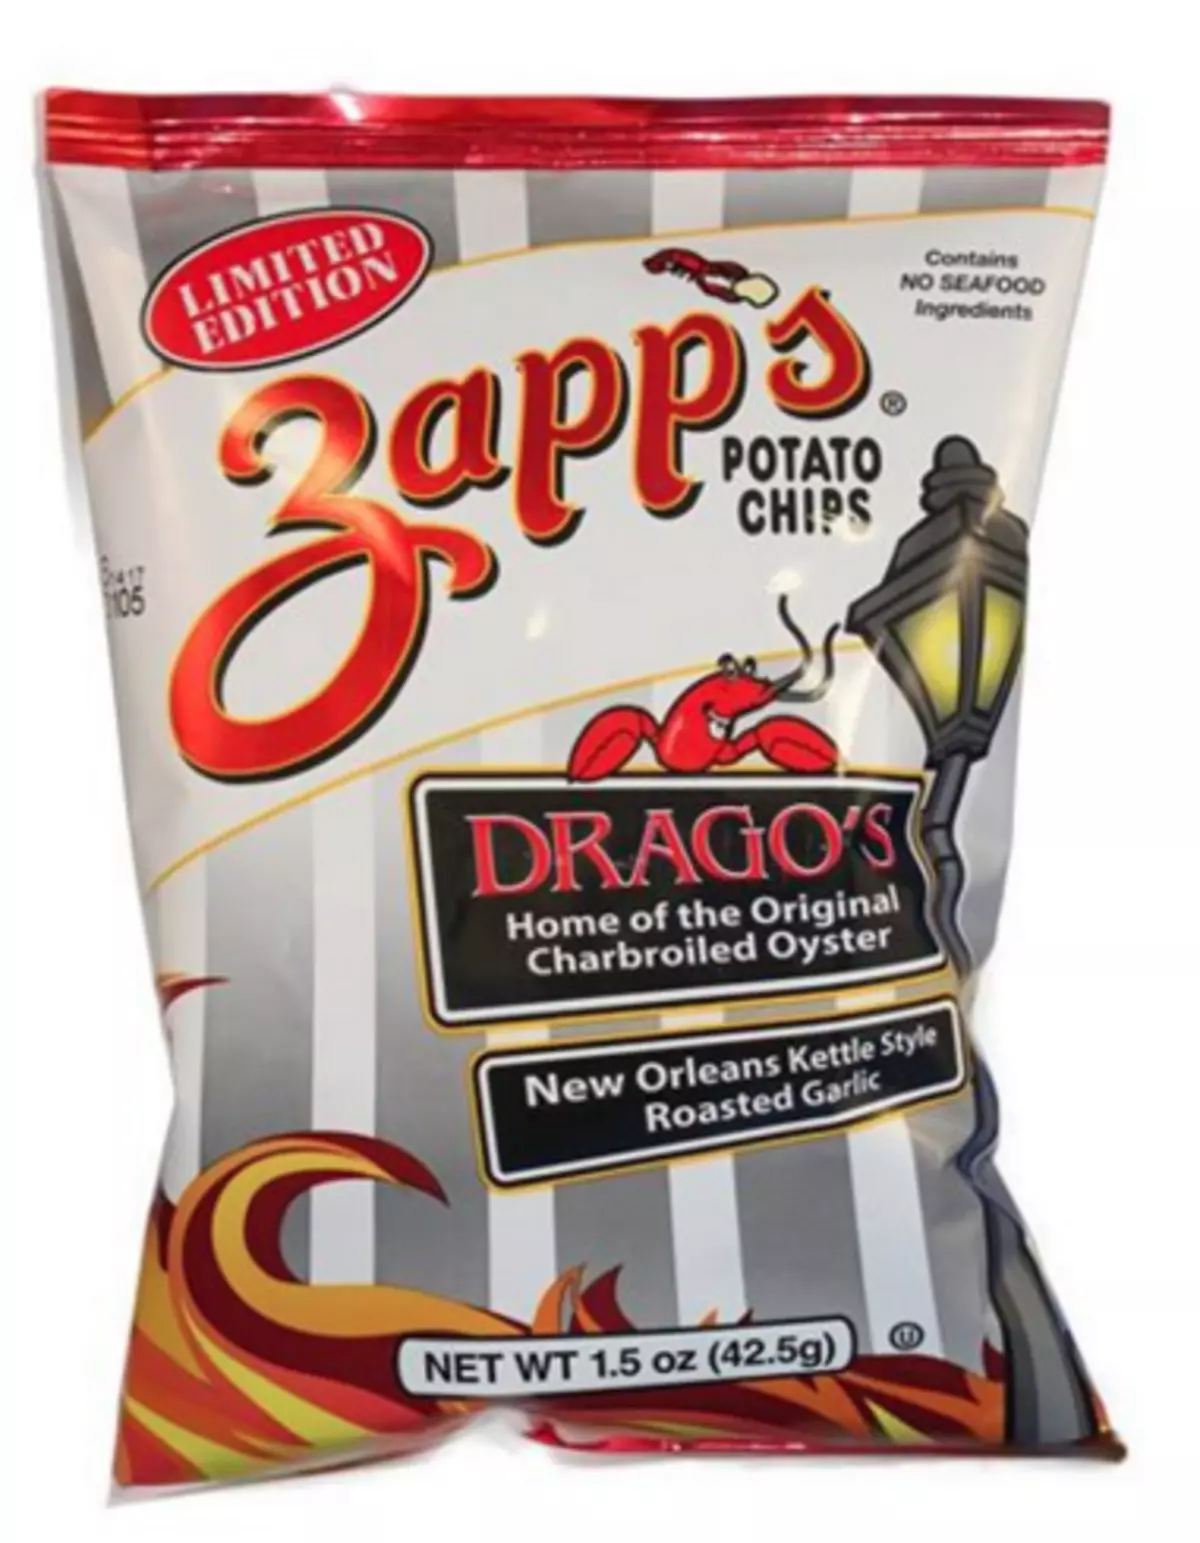 Zapp's New Drago's Charbroiled Oyster Potato Chips